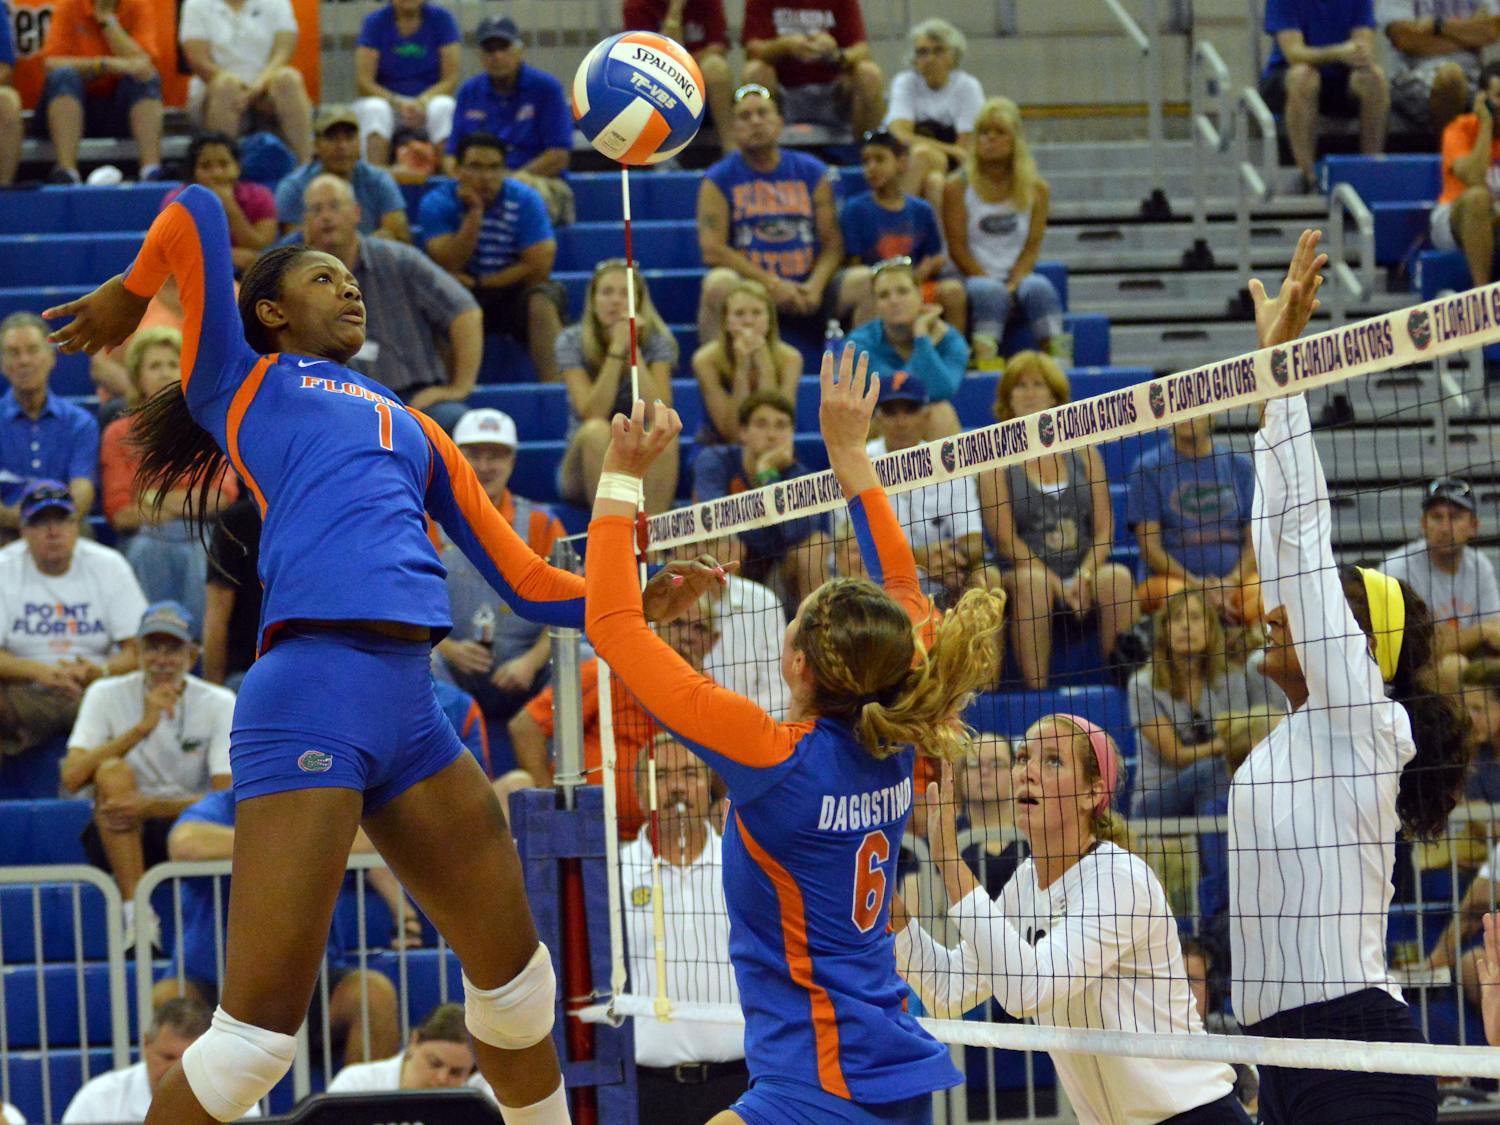 Freshman middle blocker Rhamat Alhassan swings for a kill during Florida's 3-0 win against Georgia Southern on Aug. 29 in the O'Connell Center.